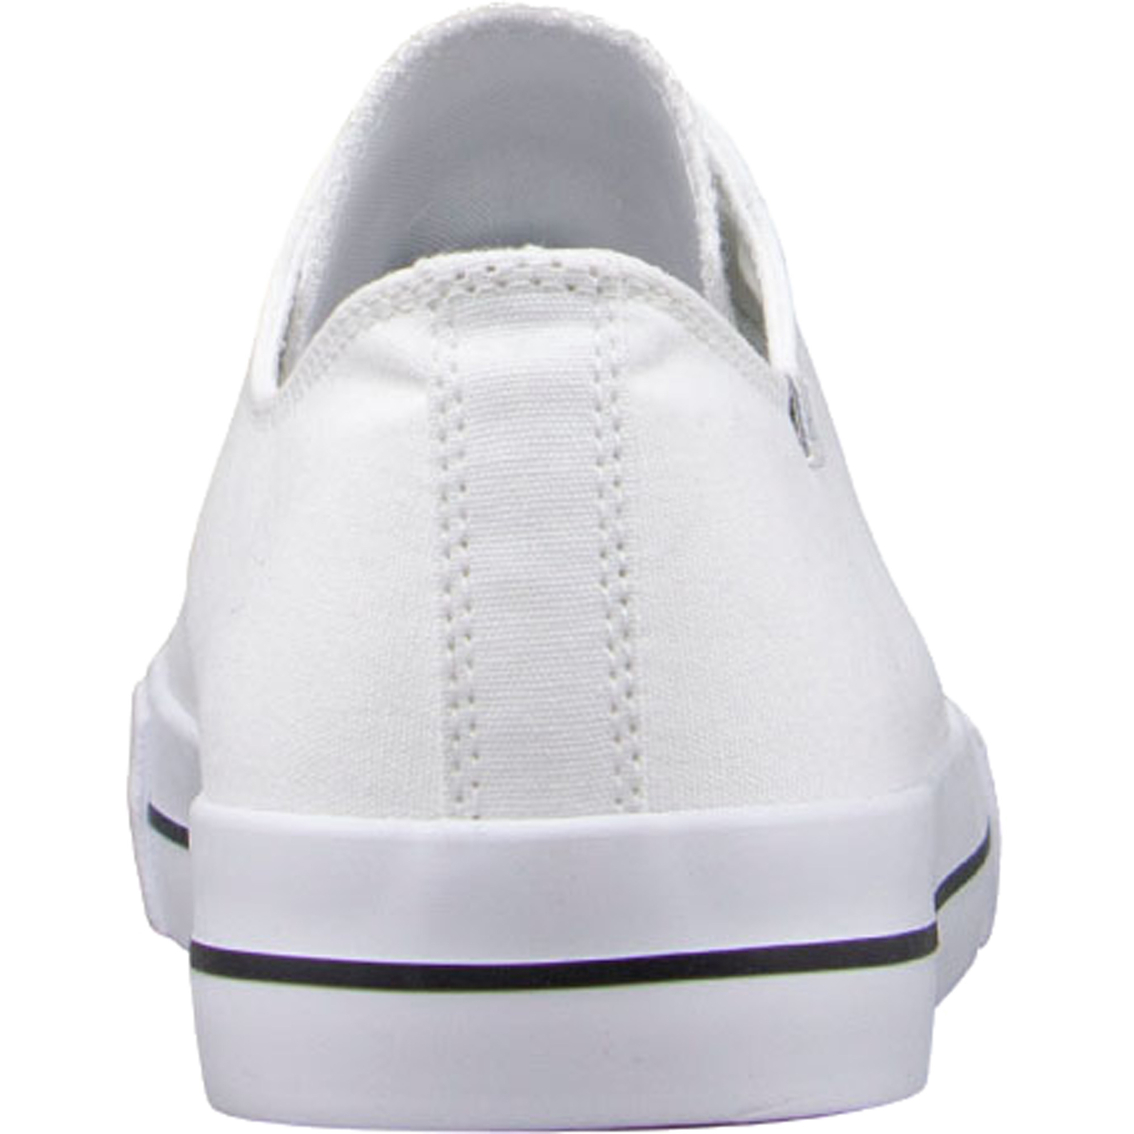 Lugz Men's Stagger Lo Sneakers - Image 2 of 6